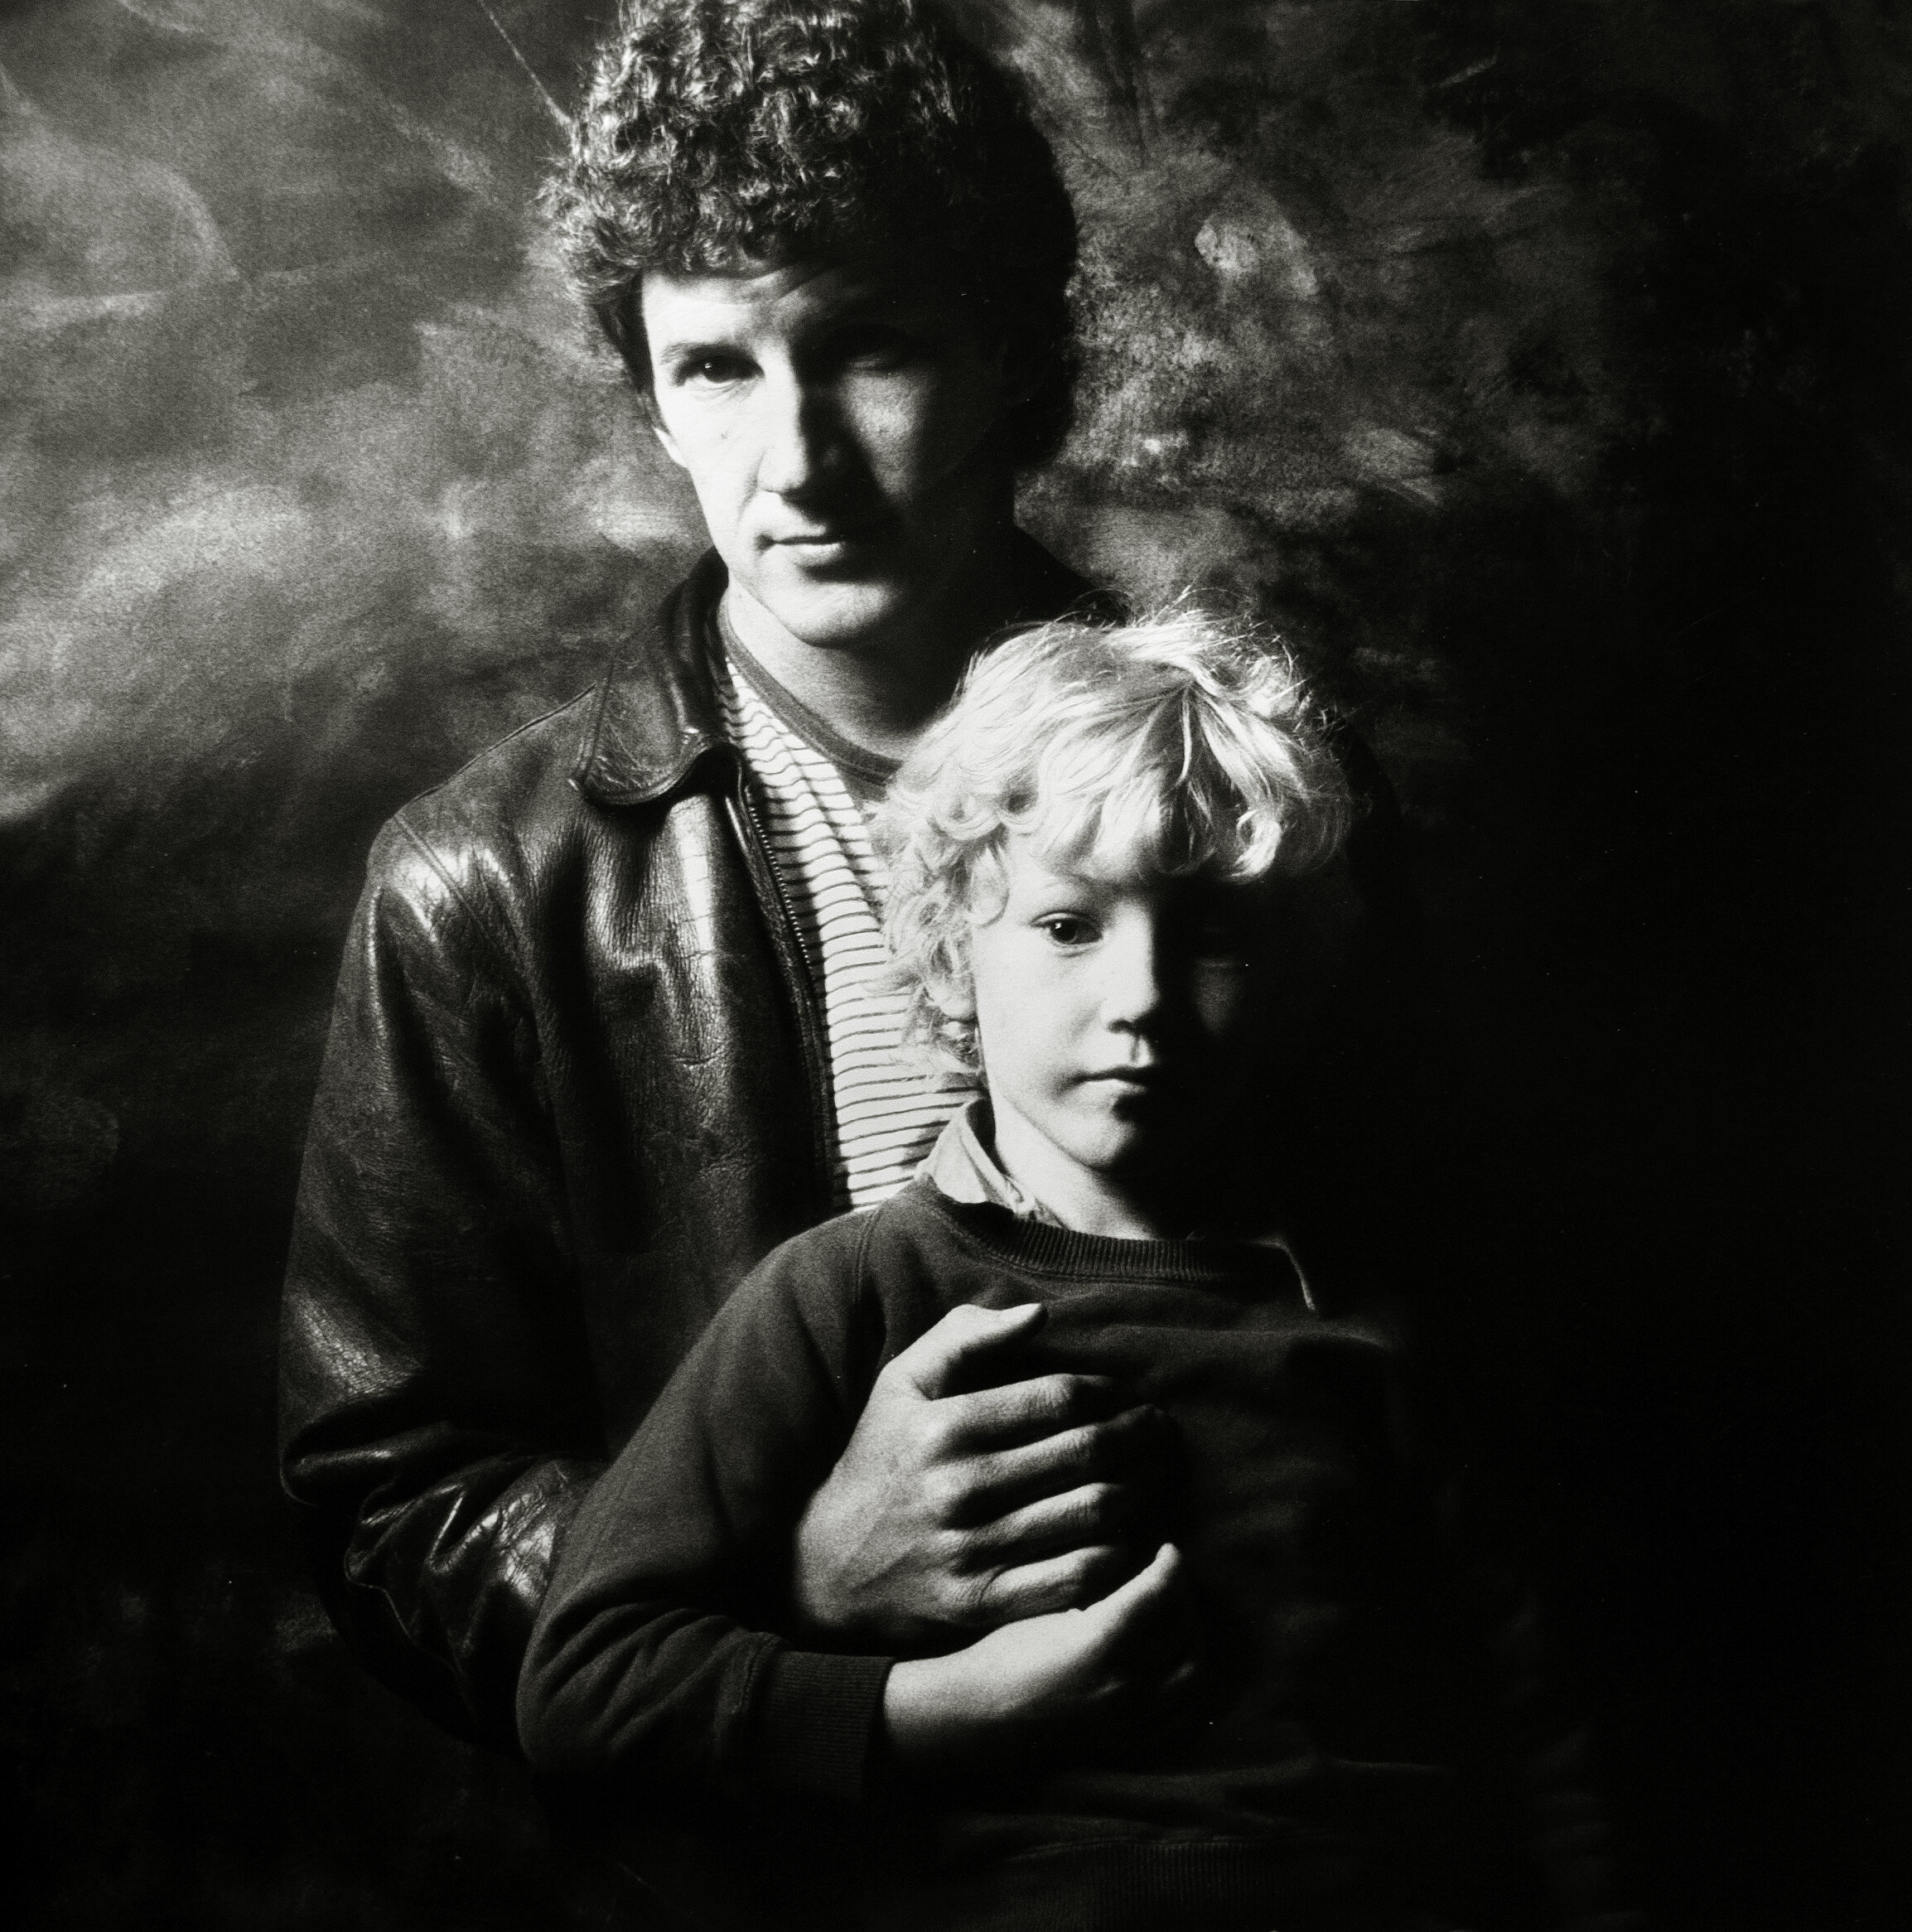 John and Lucy, 1983